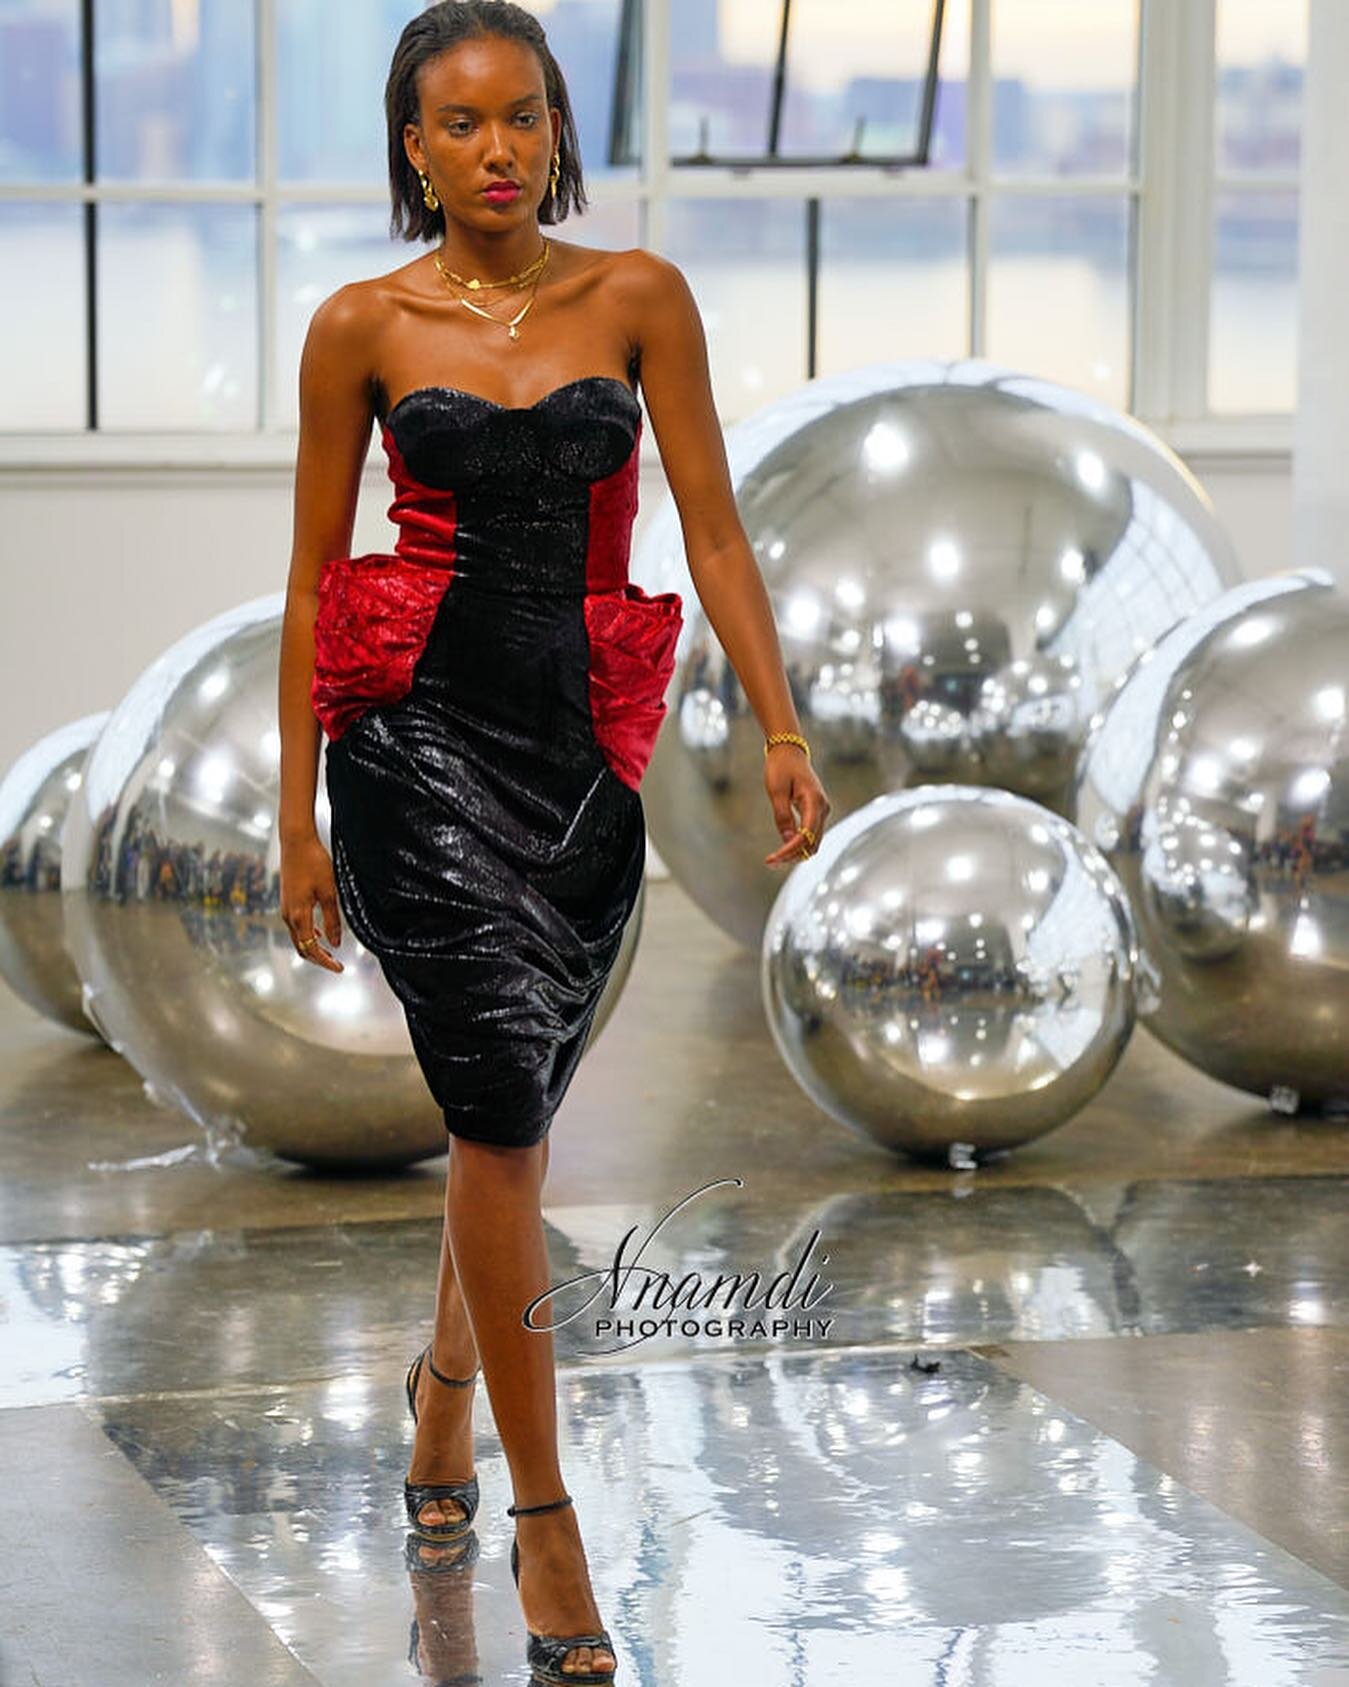 JOYA MA NYFW23 &ldquo;Body Sacred&rdquo; collection Look 6 - Peak on hip bustier dress. DM for inquires 
.
Photo by @ic.nnamdi and @jojoannaff 
Model: @gaellezzz 
Shoes by @elizeeshoes 
Jewelry by @themessyarchive 
Show at @flyingsolonyc @canoestudio